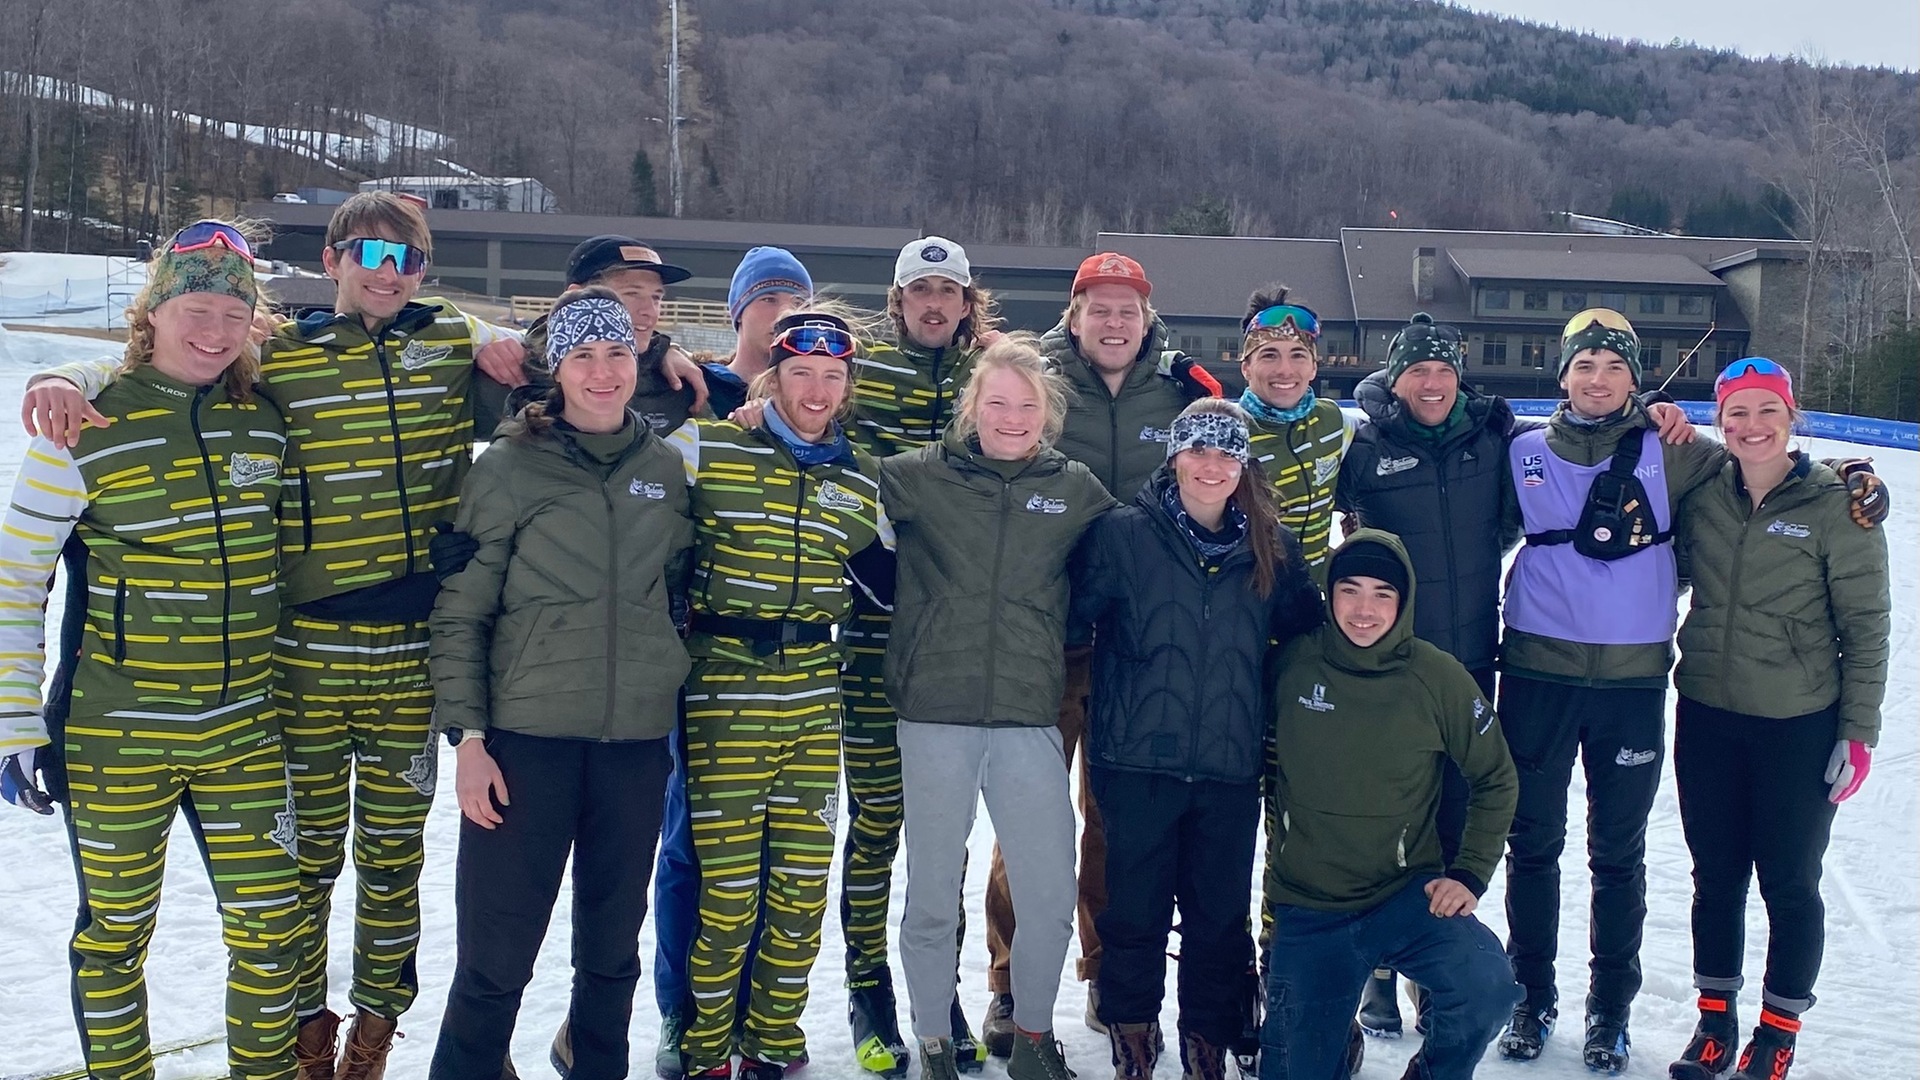 The Nordic team poses for a team photo after competing at the USCSA Championships at Mount Van Hoevenberg. Thumbnail